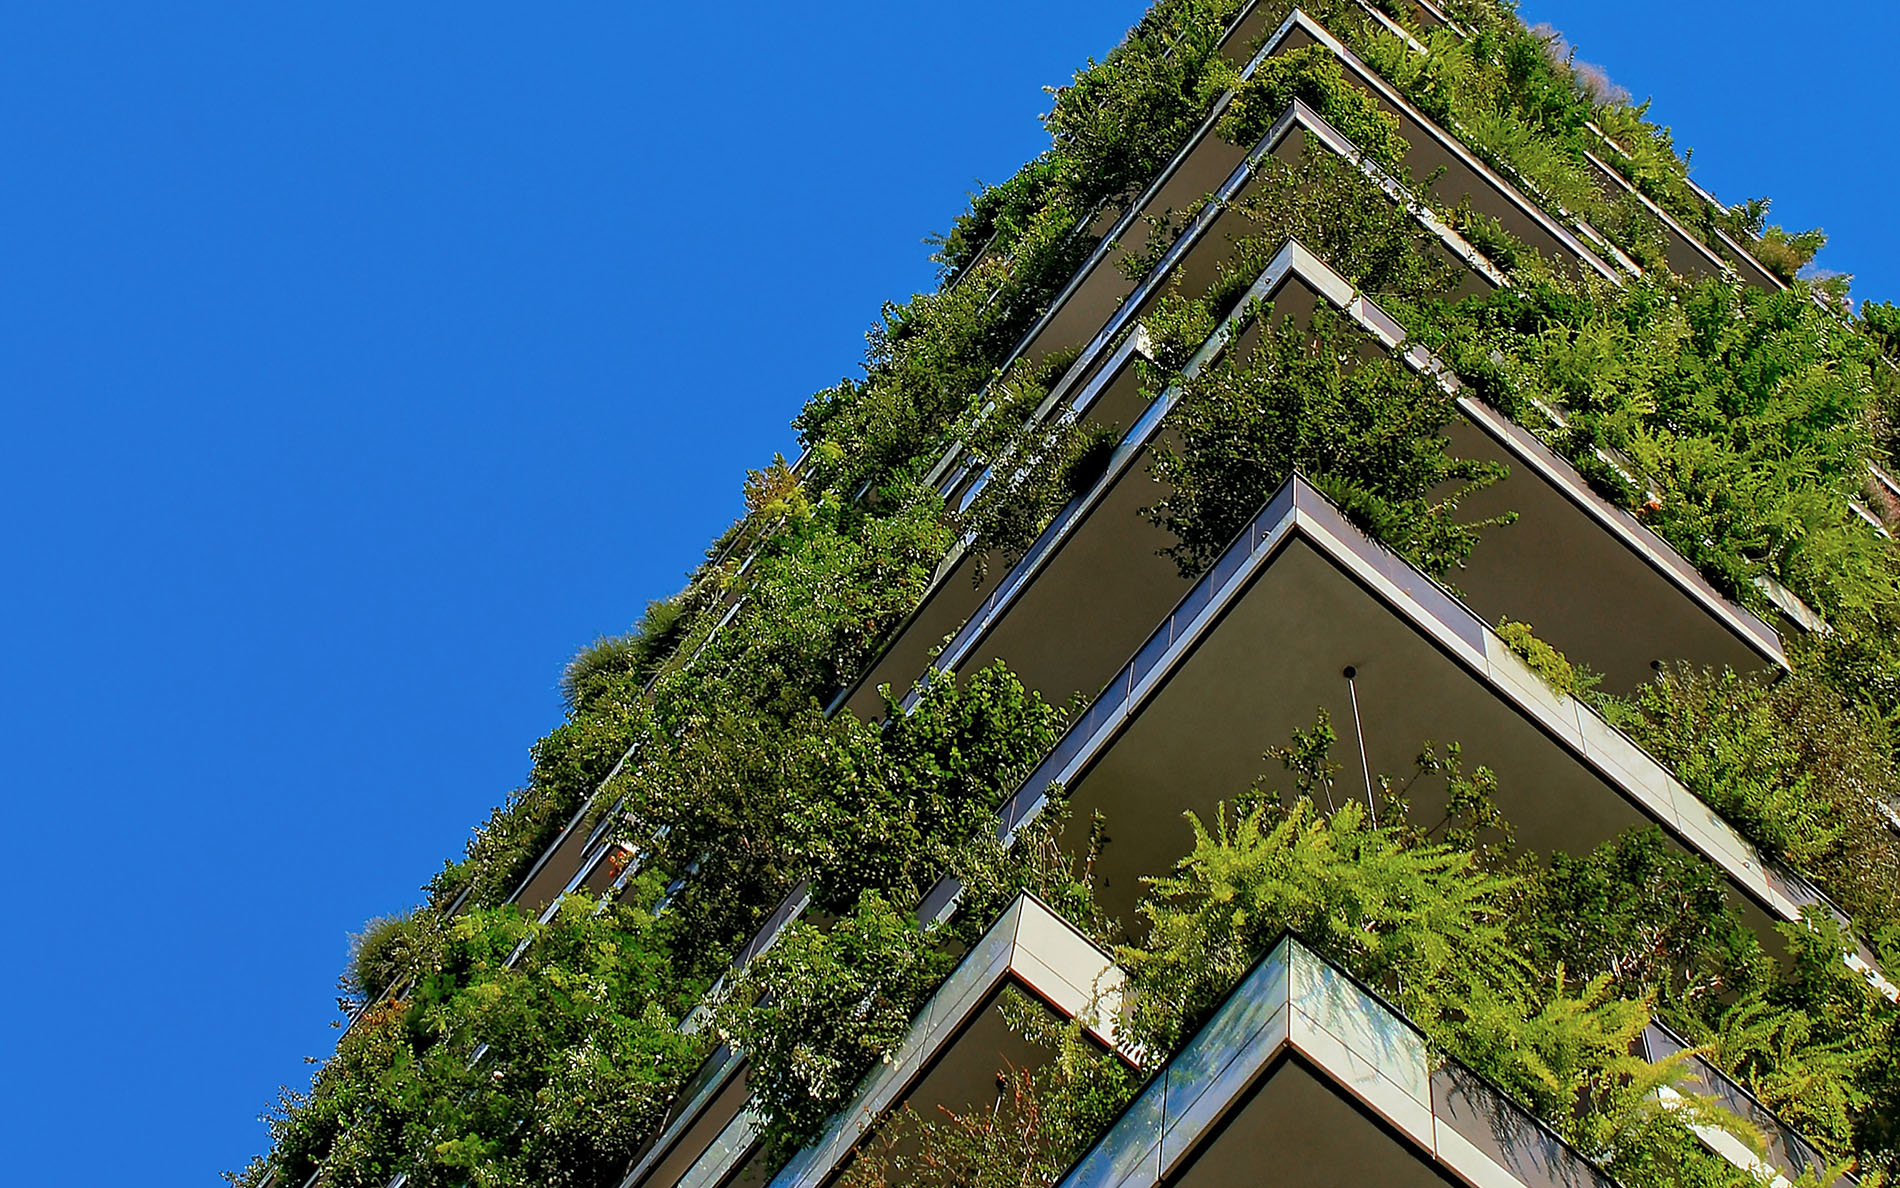 5 Unexpected Outcomes of Sustainable Buildings